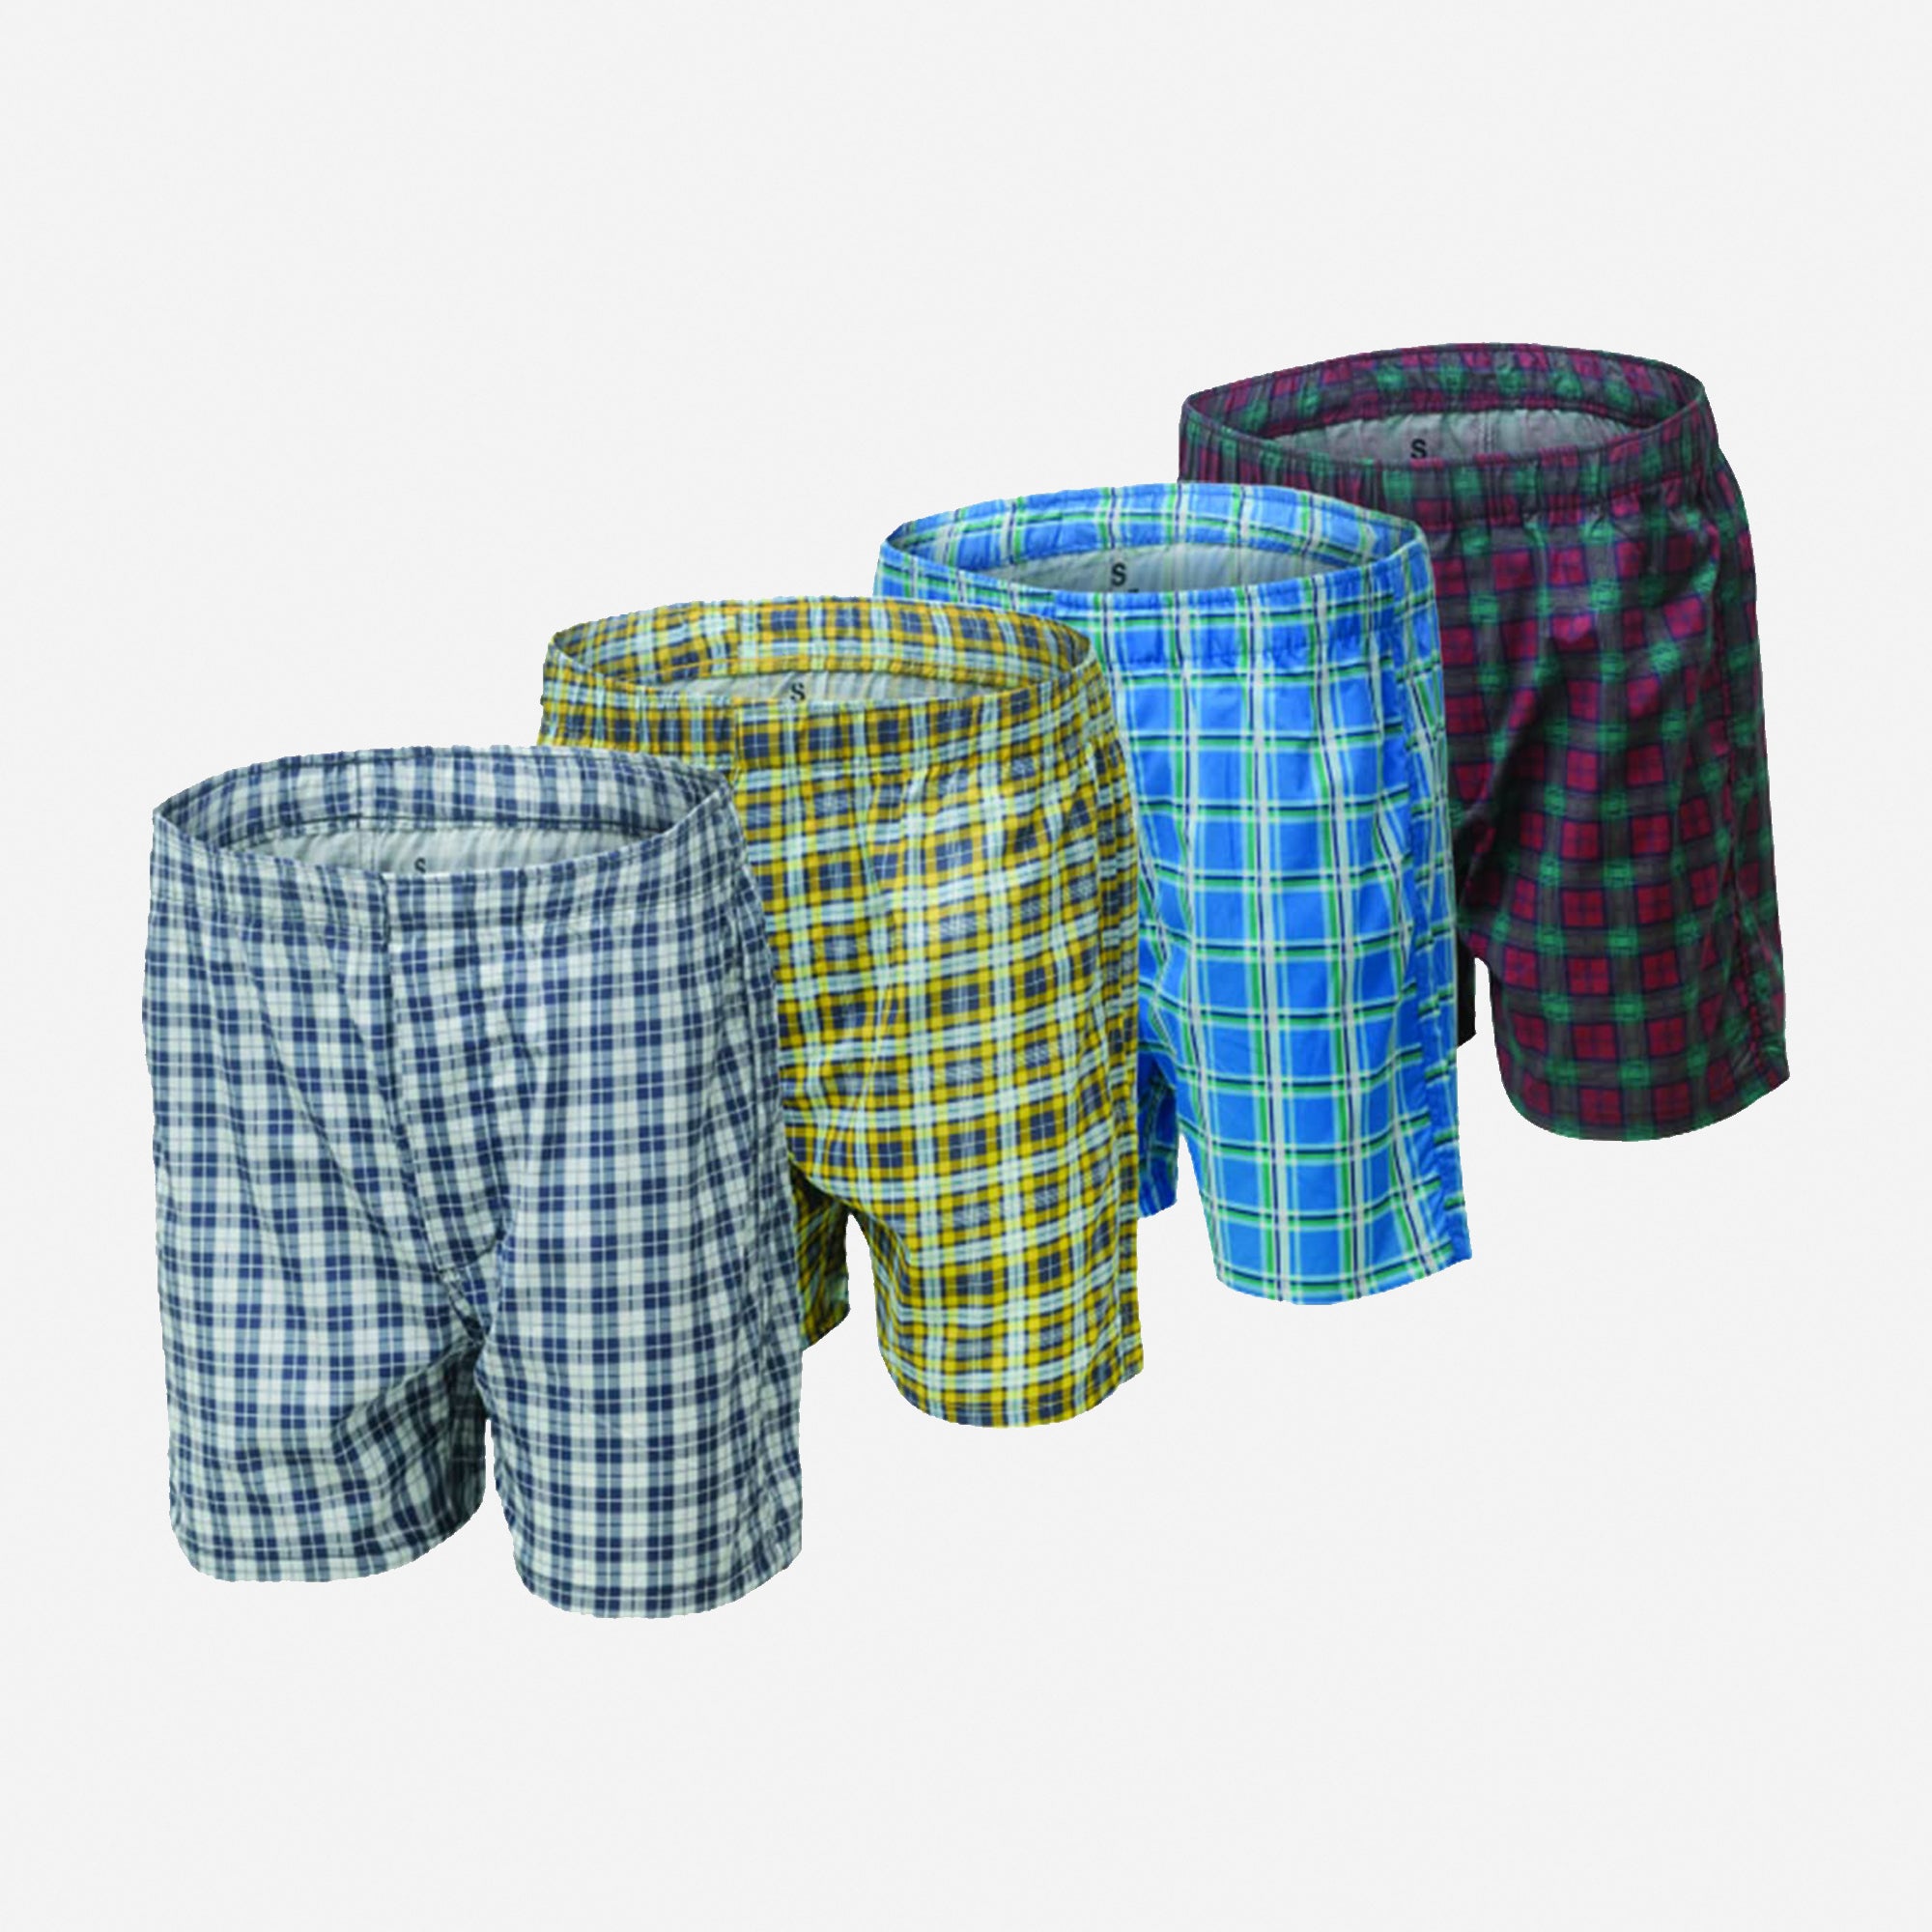 Men's 100% Cotton Boxer Shorts Waistband Check Print Boxers -Pack of 4